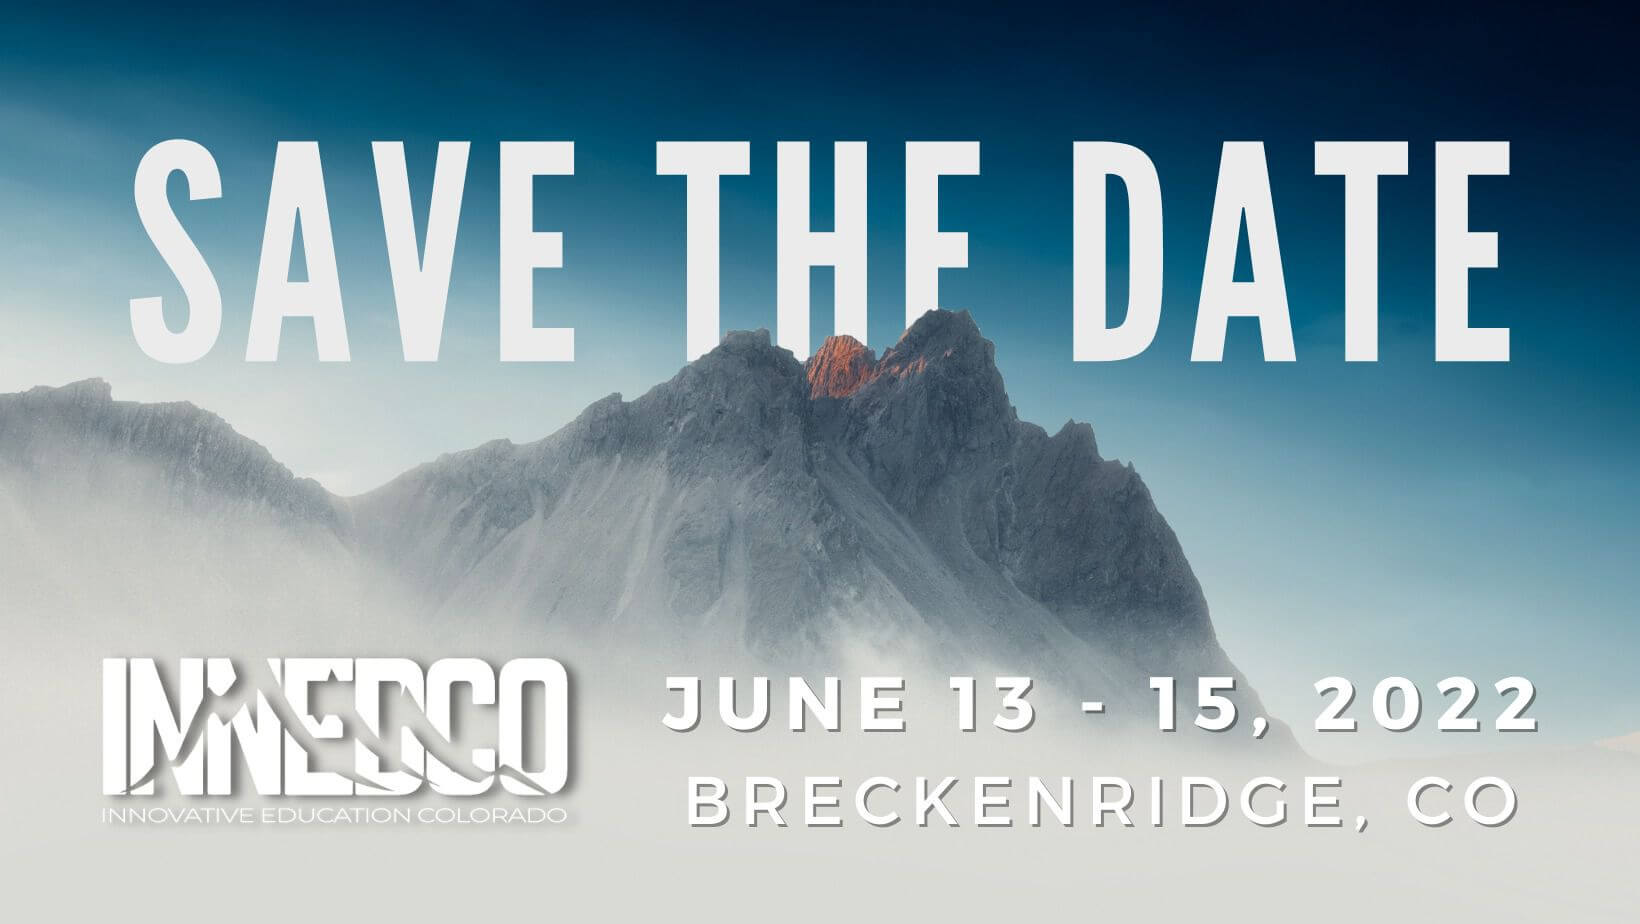 Save the date - Innedco 2022